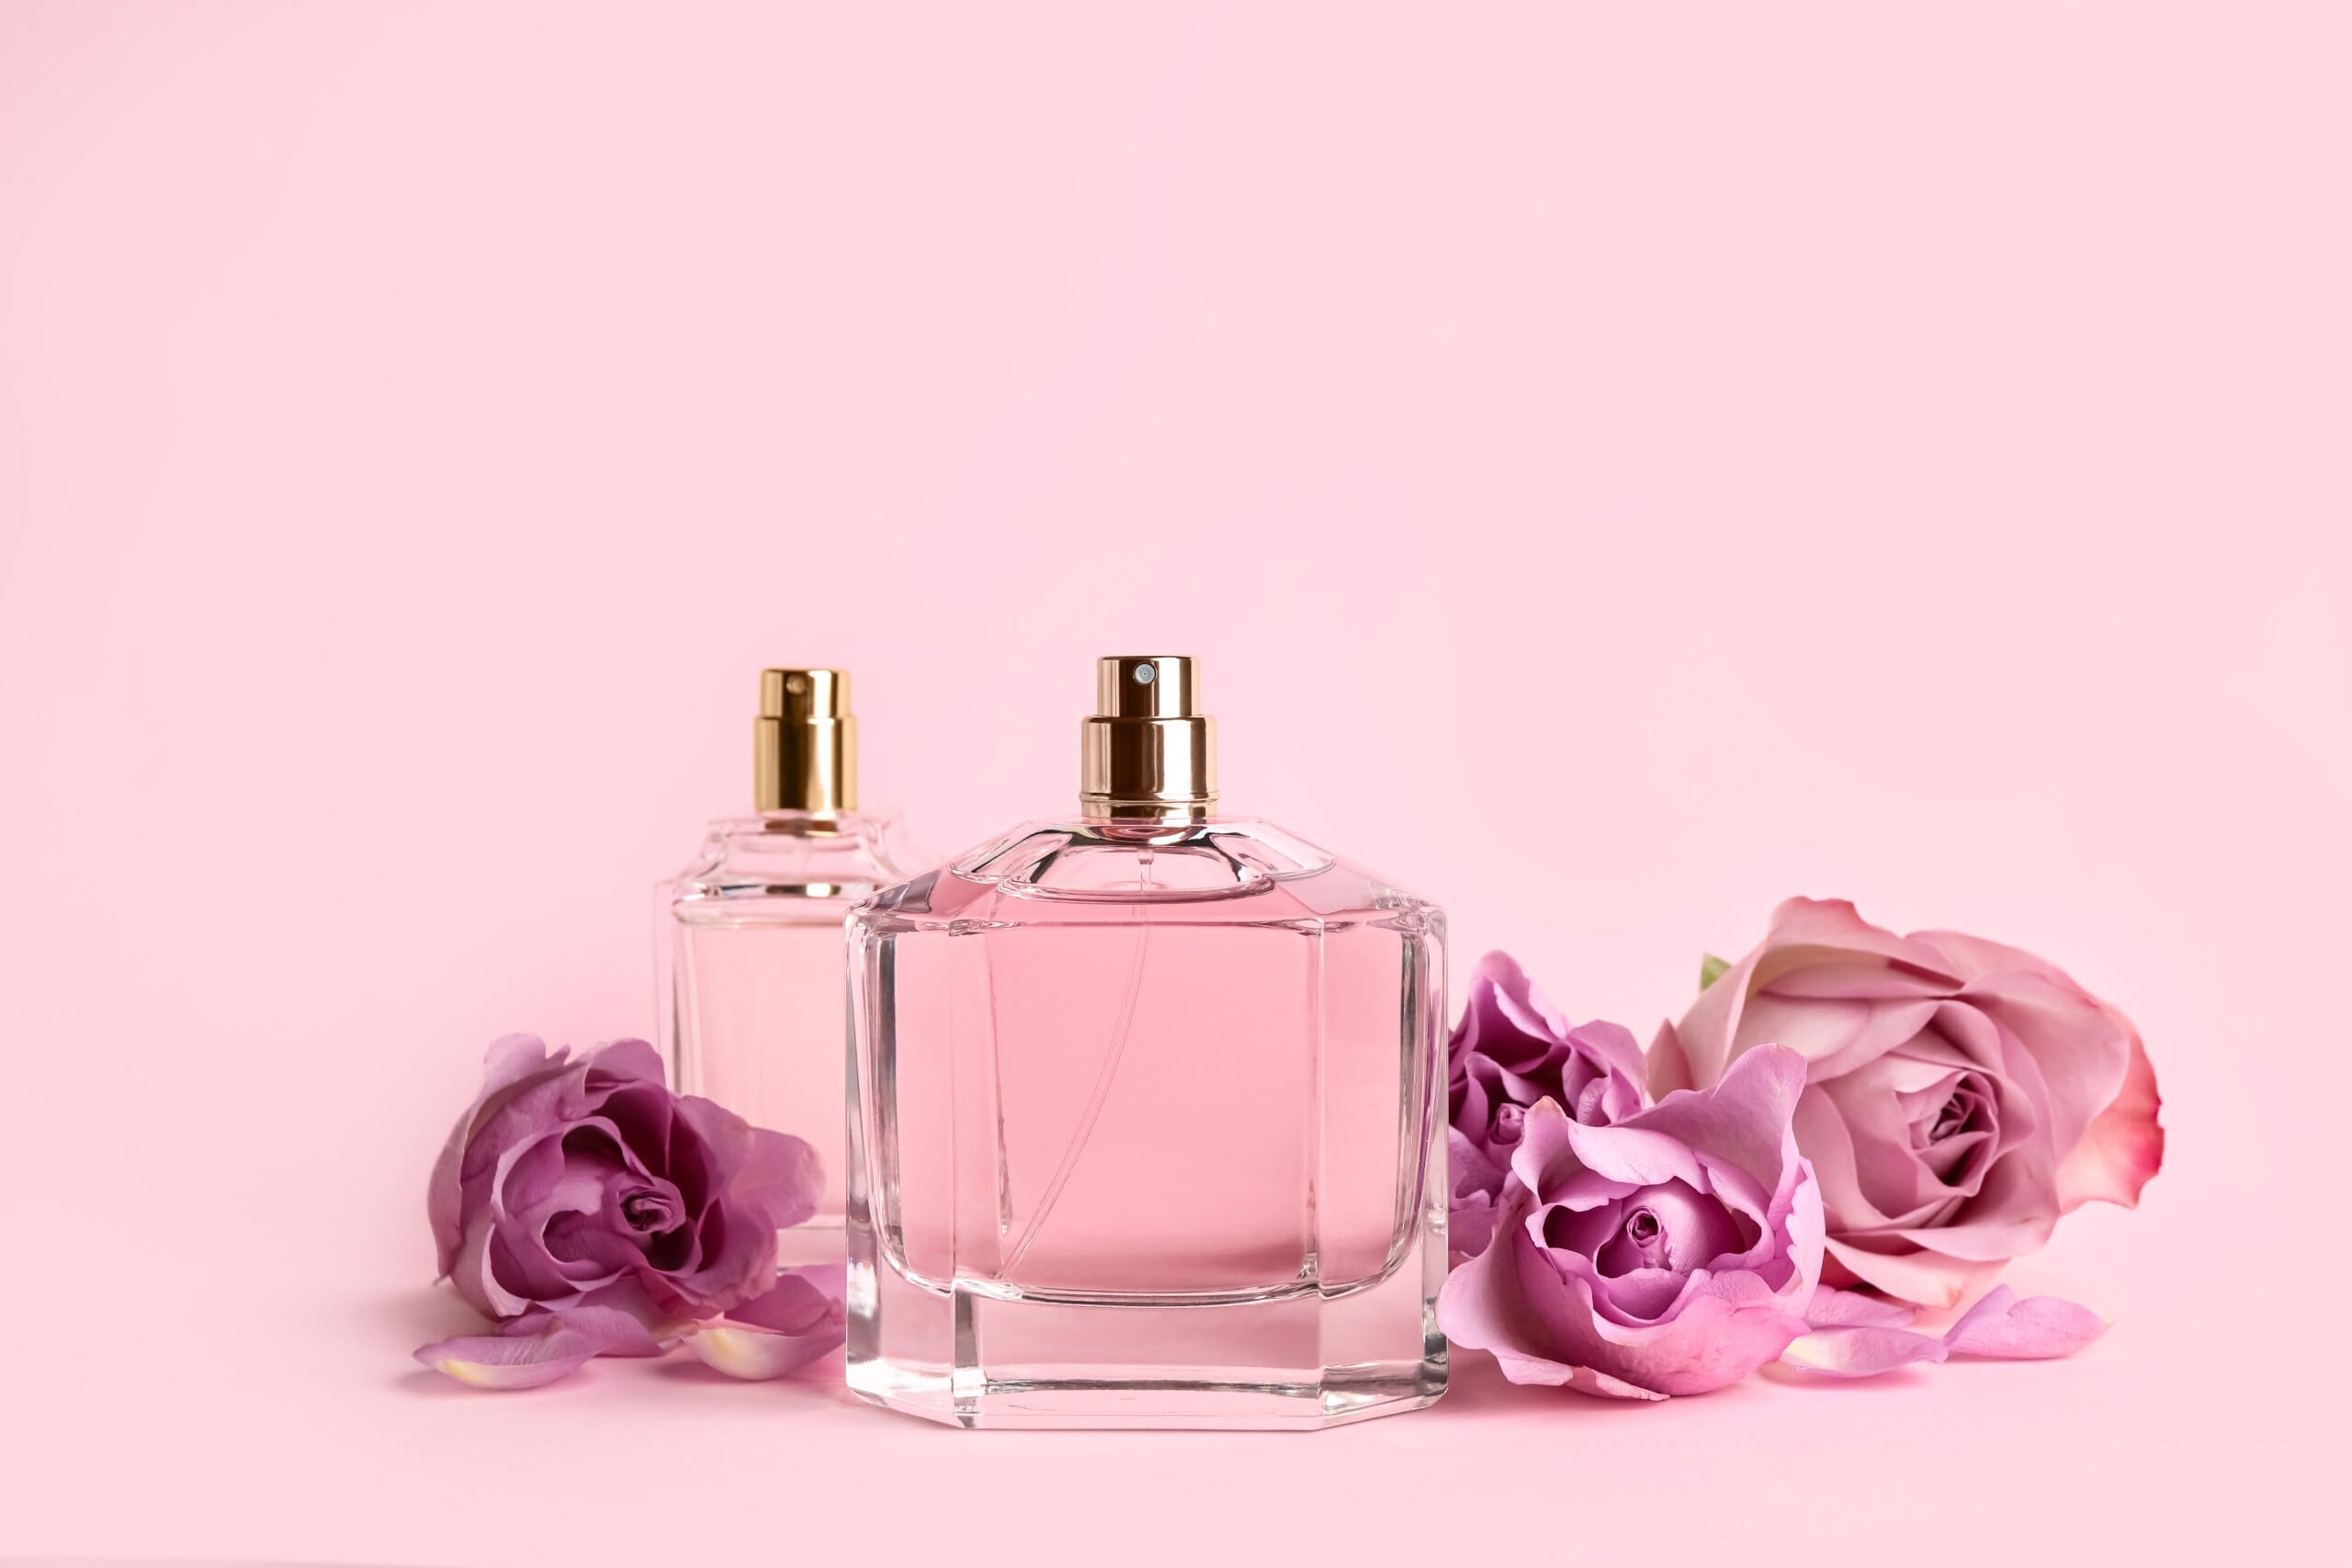 Bottles of perfume and beautiful roses on pink background.